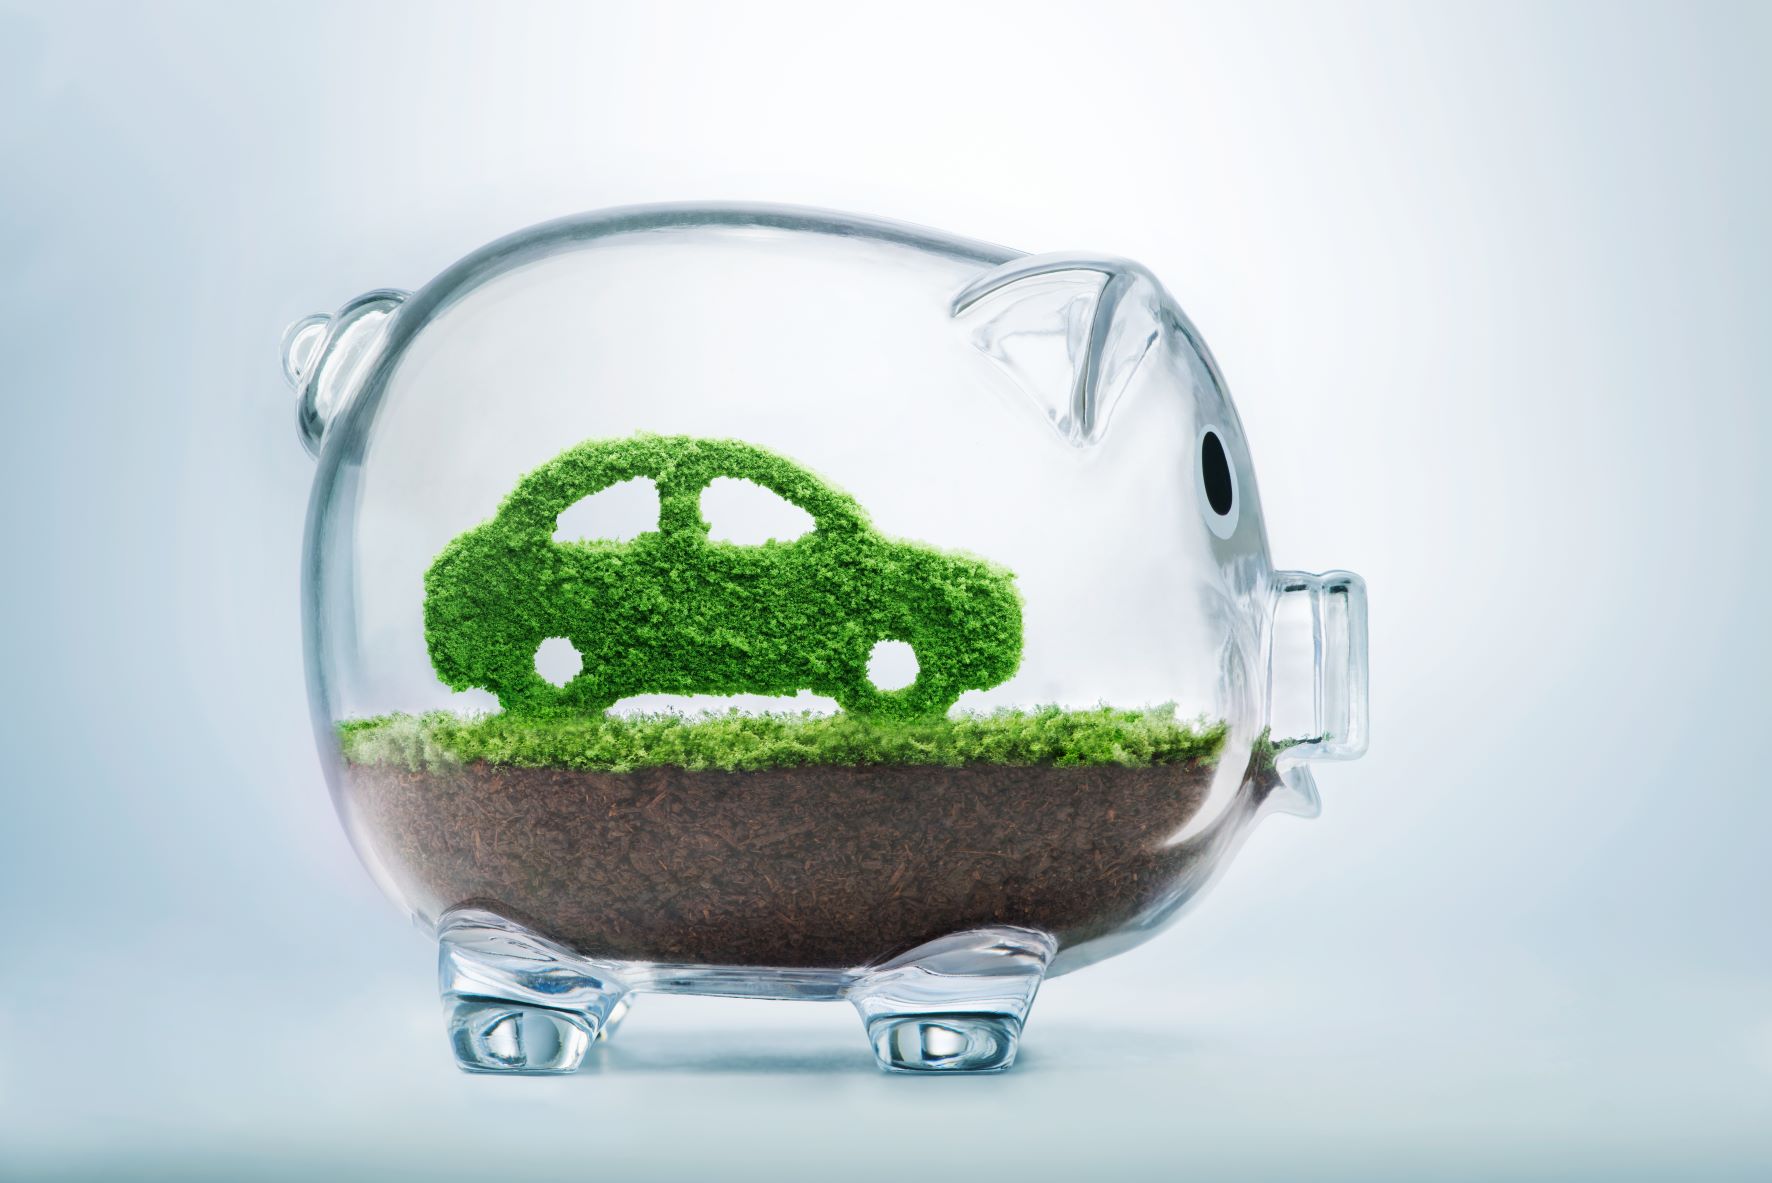 clear glass piggy bank showing a green car made of grass inside of it